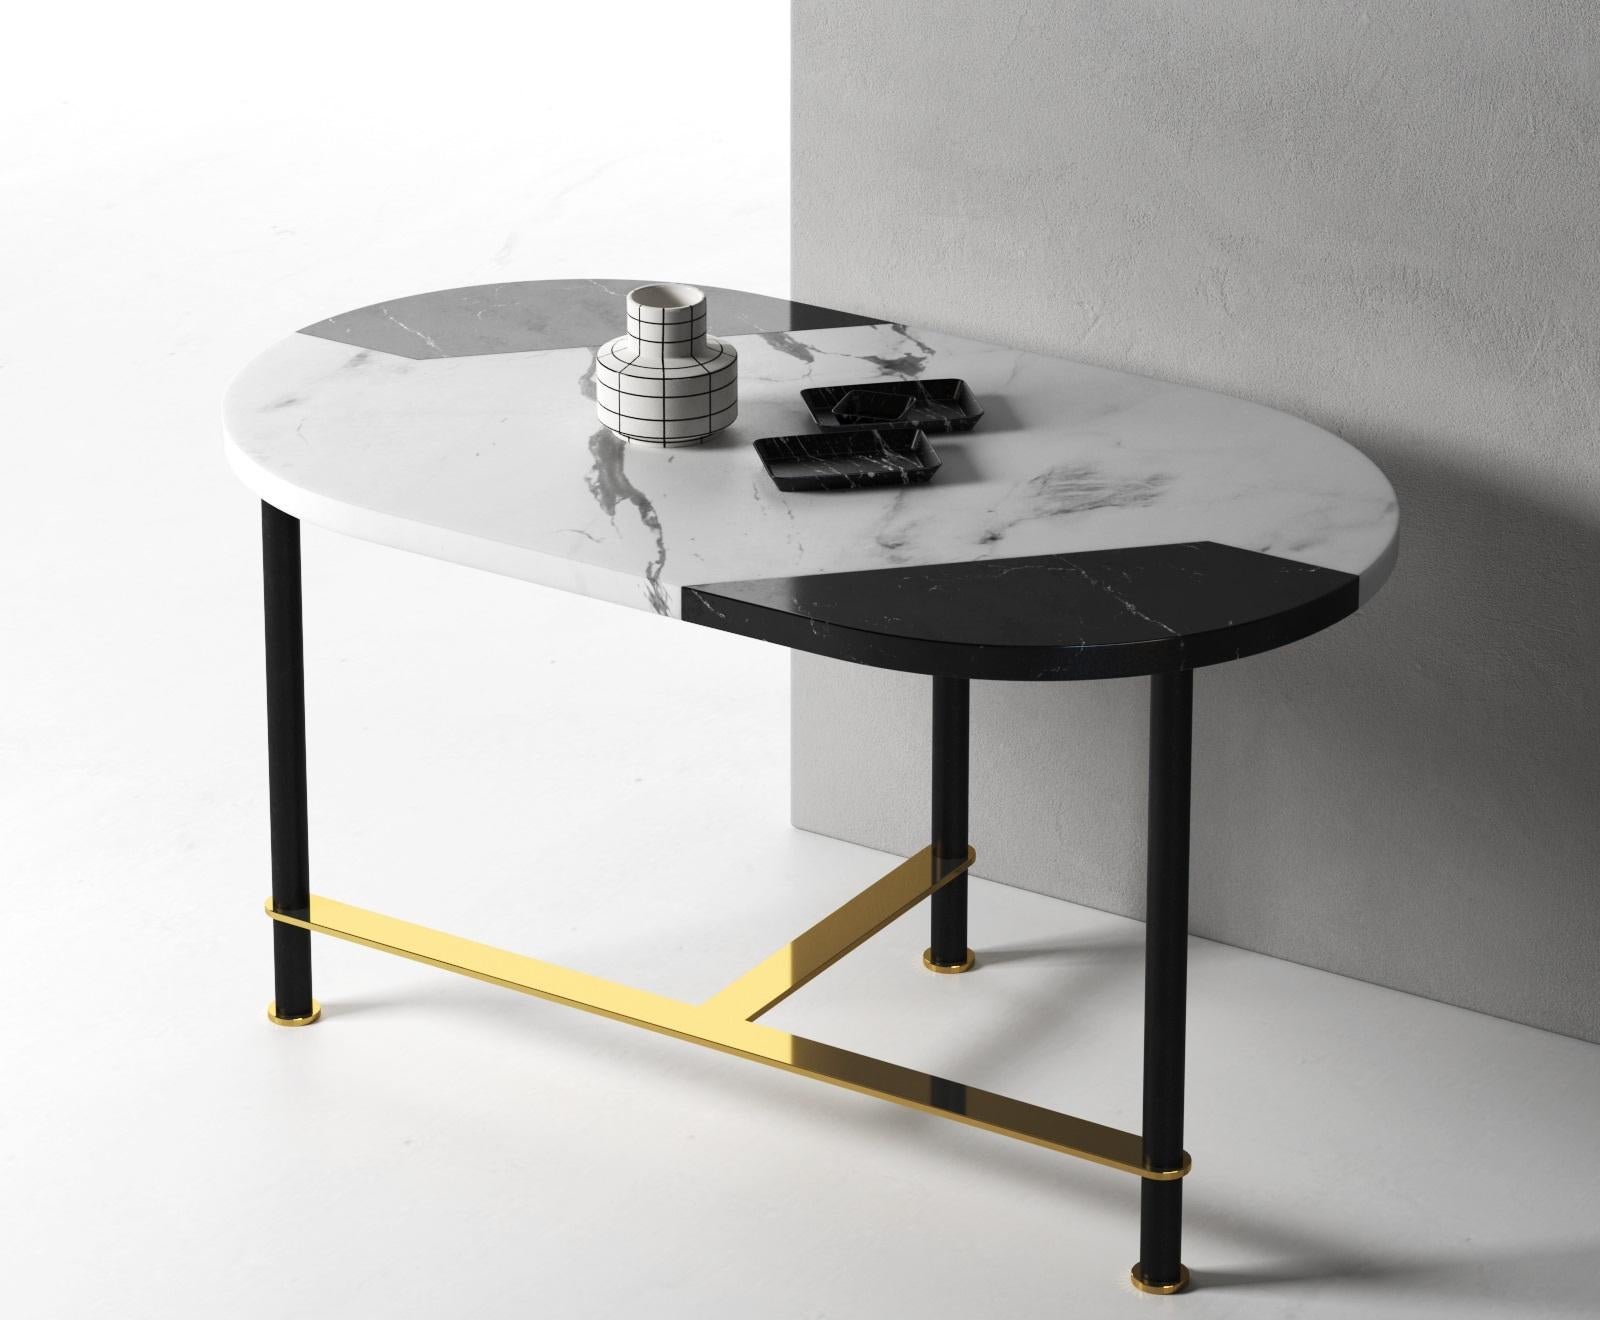 Console table by Pietro Russo for Gallotti & Radice with Bianco Statuary and Nero Marquinia marble inlaid top or total black in Nero Marquinia marble. Brass structure. 

Available also with inlaid wooden top with “Tweed” pattern, in Taba Frisé